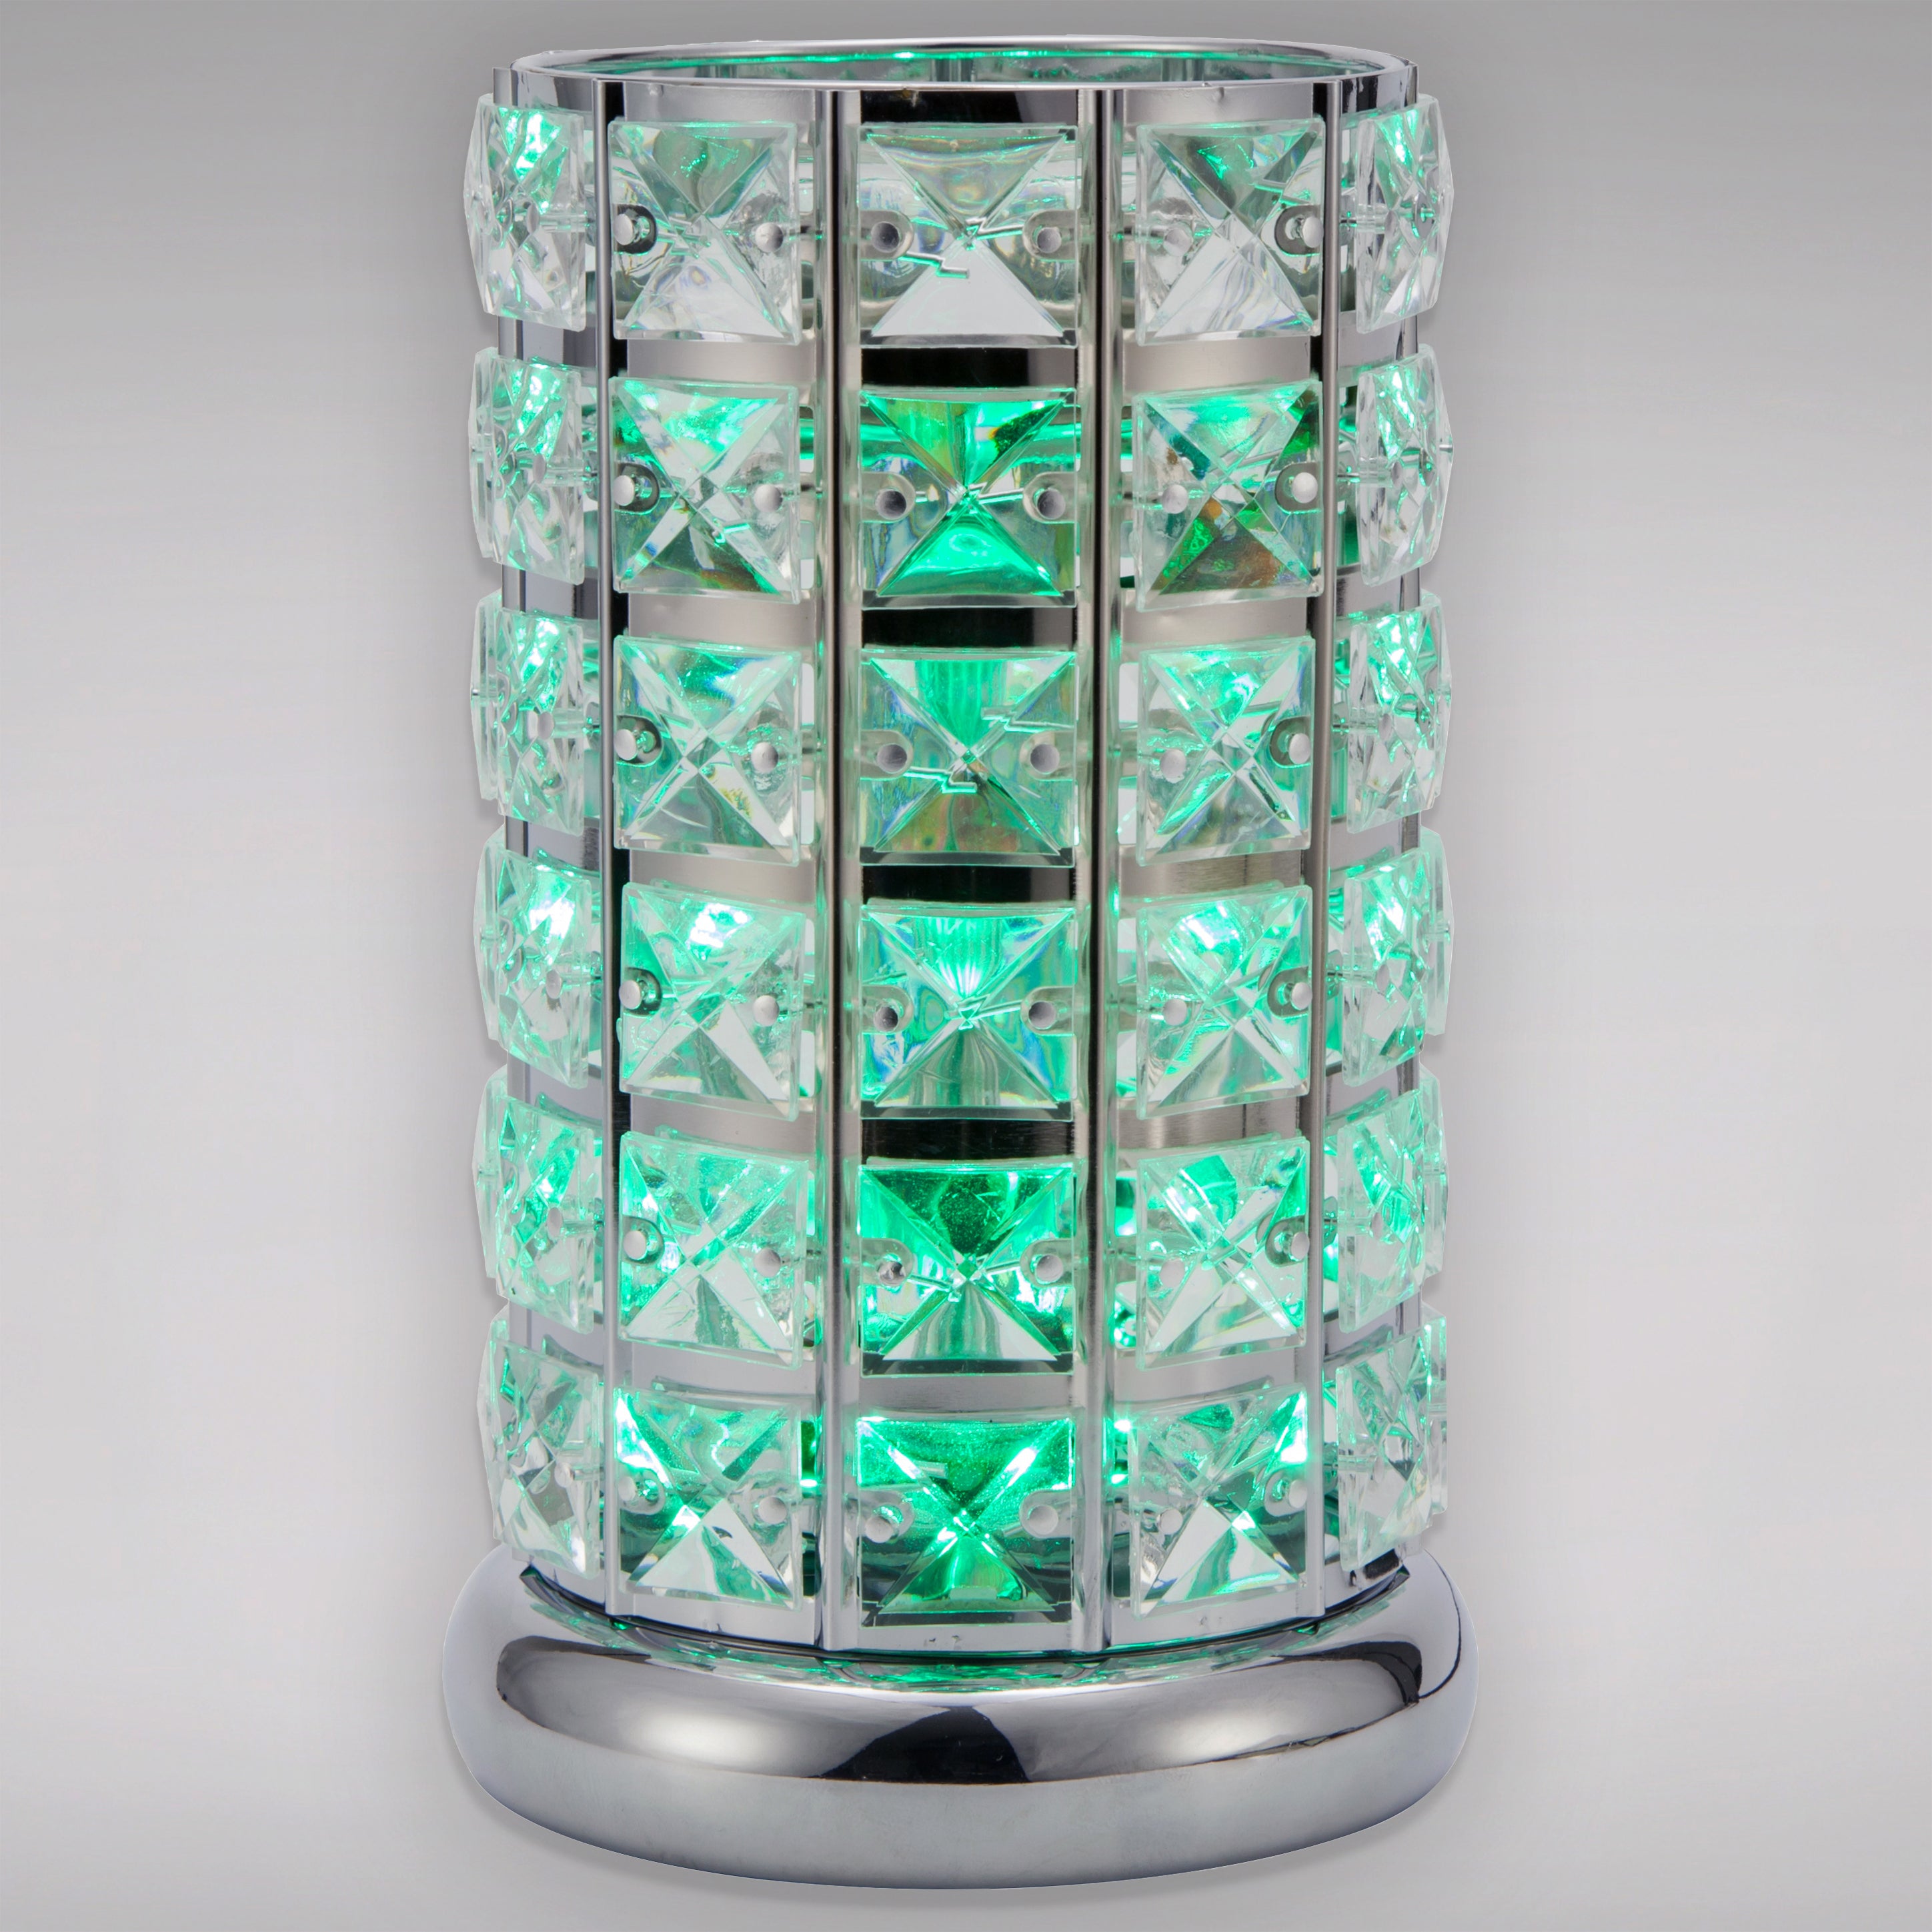 Scentchips Warmer 3D LED 'Crystal-Look' Colour Changing Display